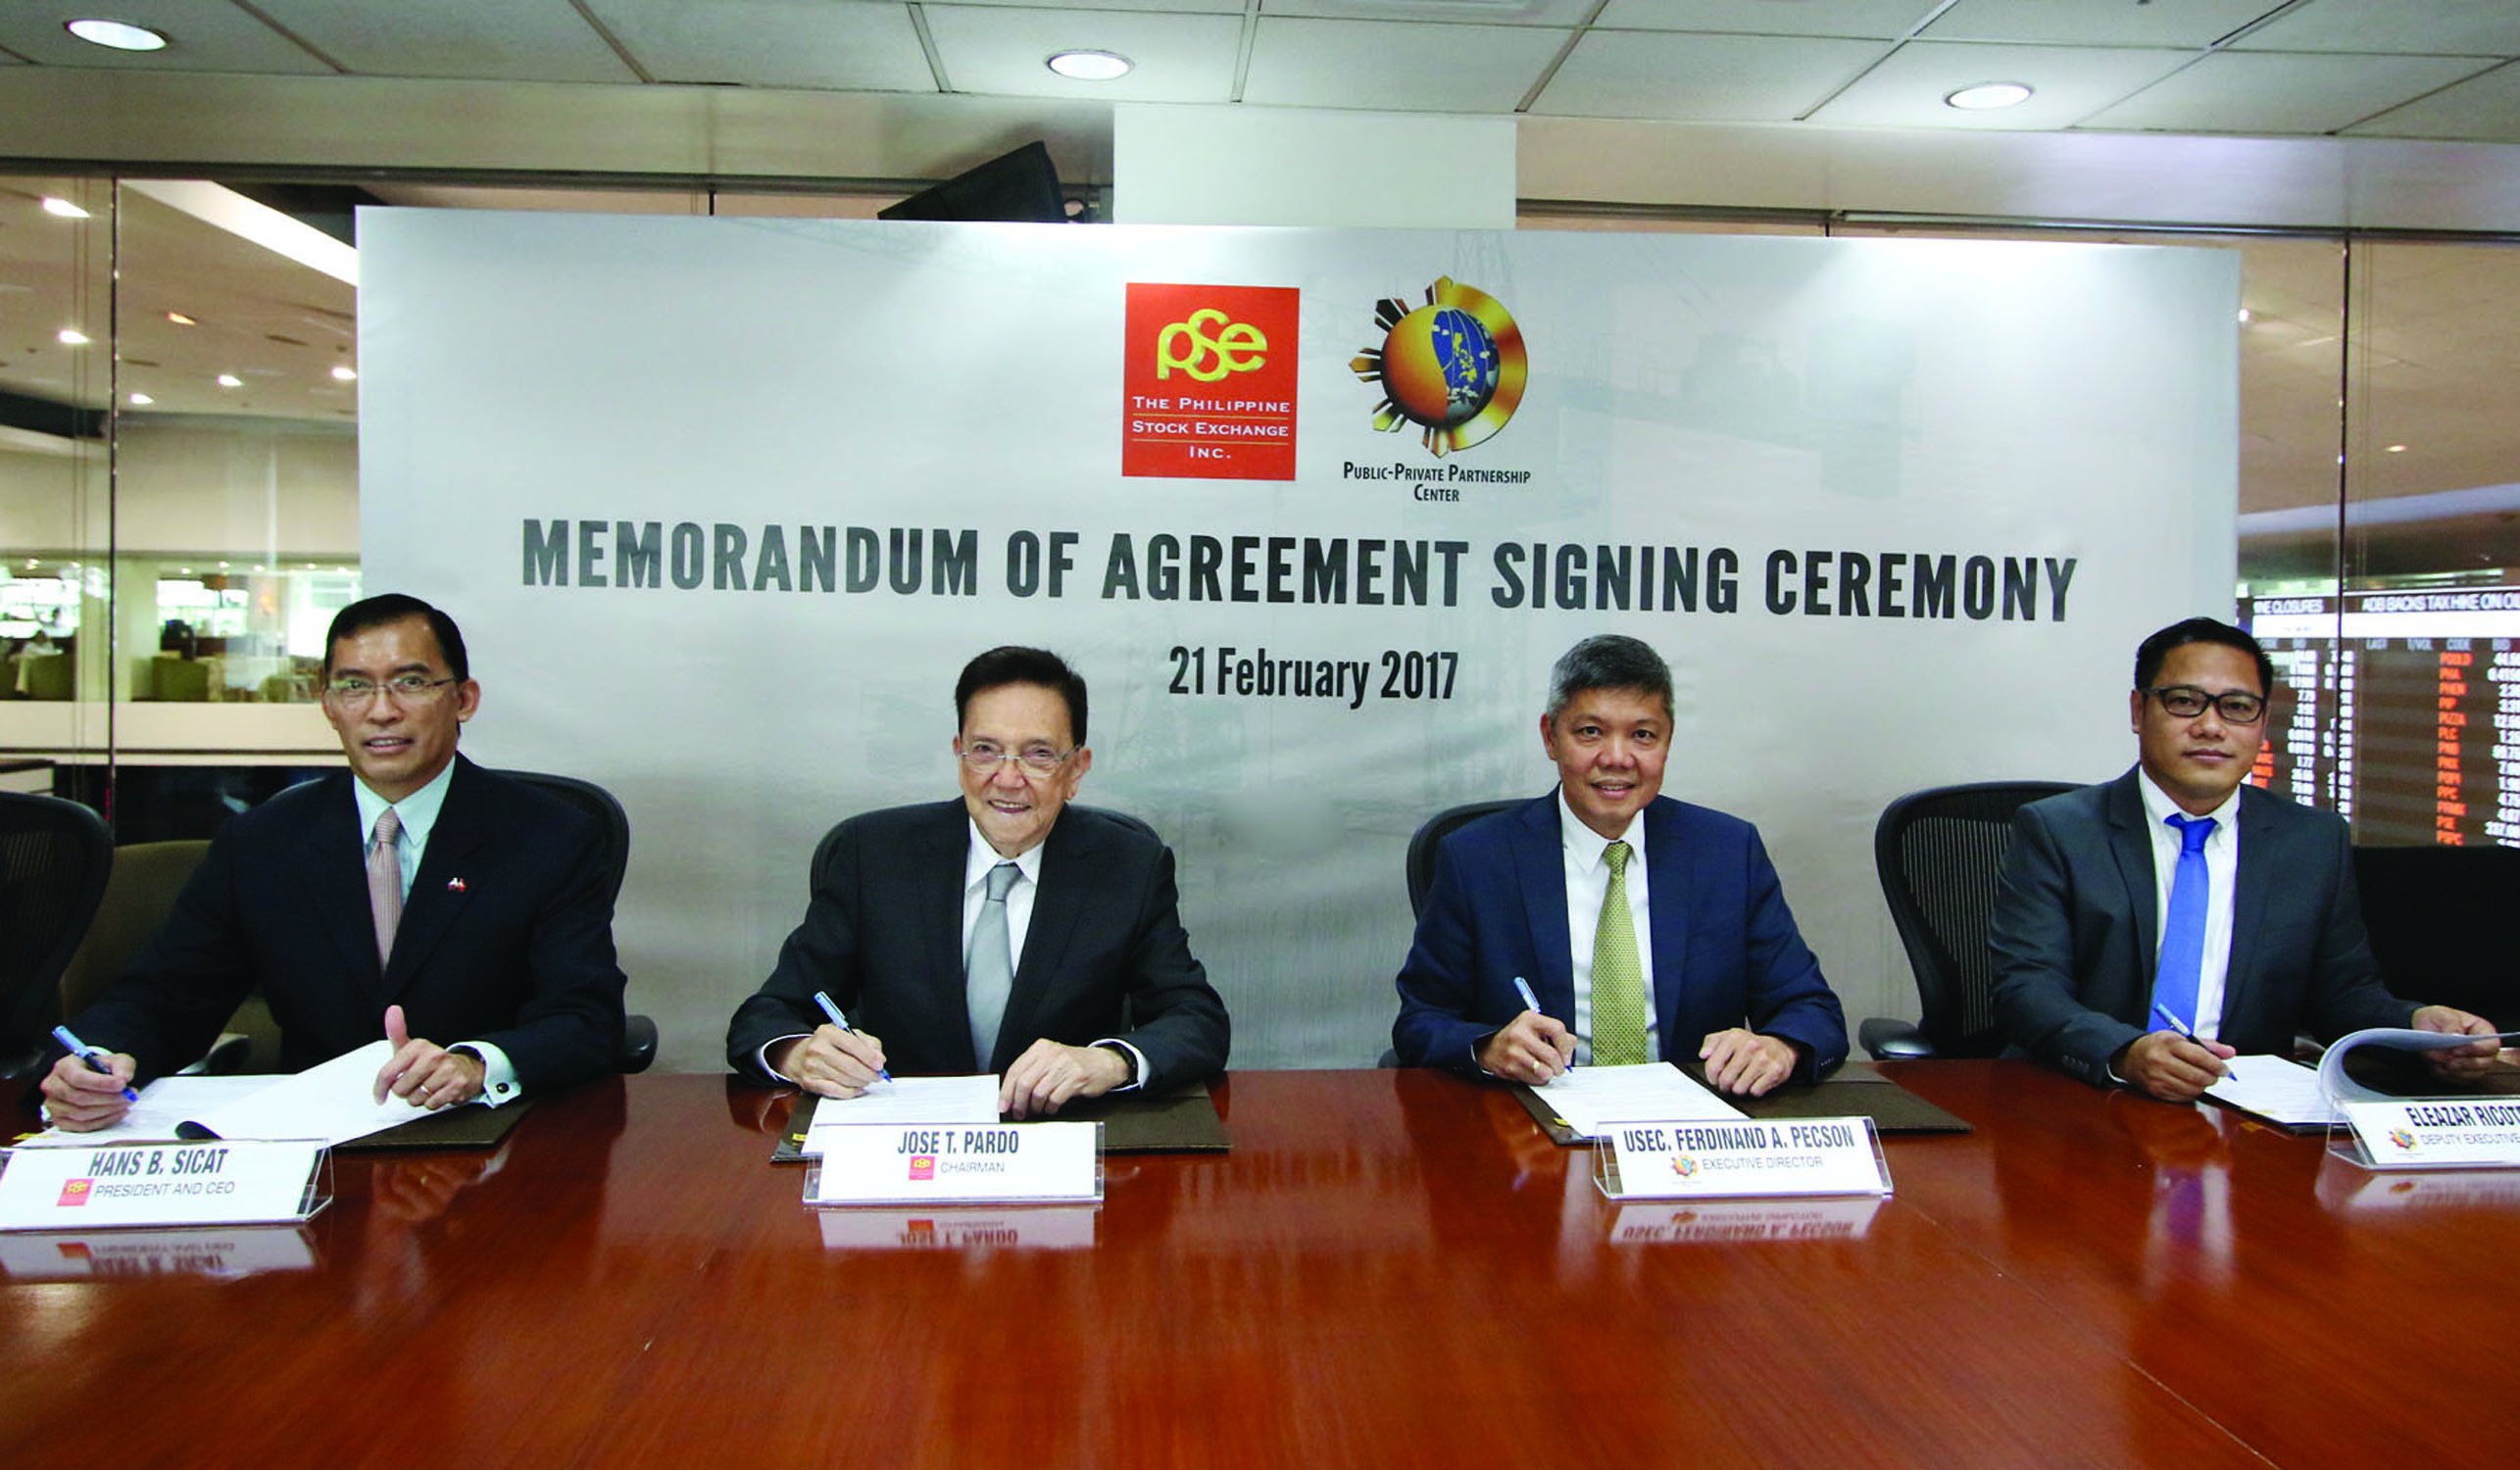 PSE, PPP Center sign MOA for PPP listing rules